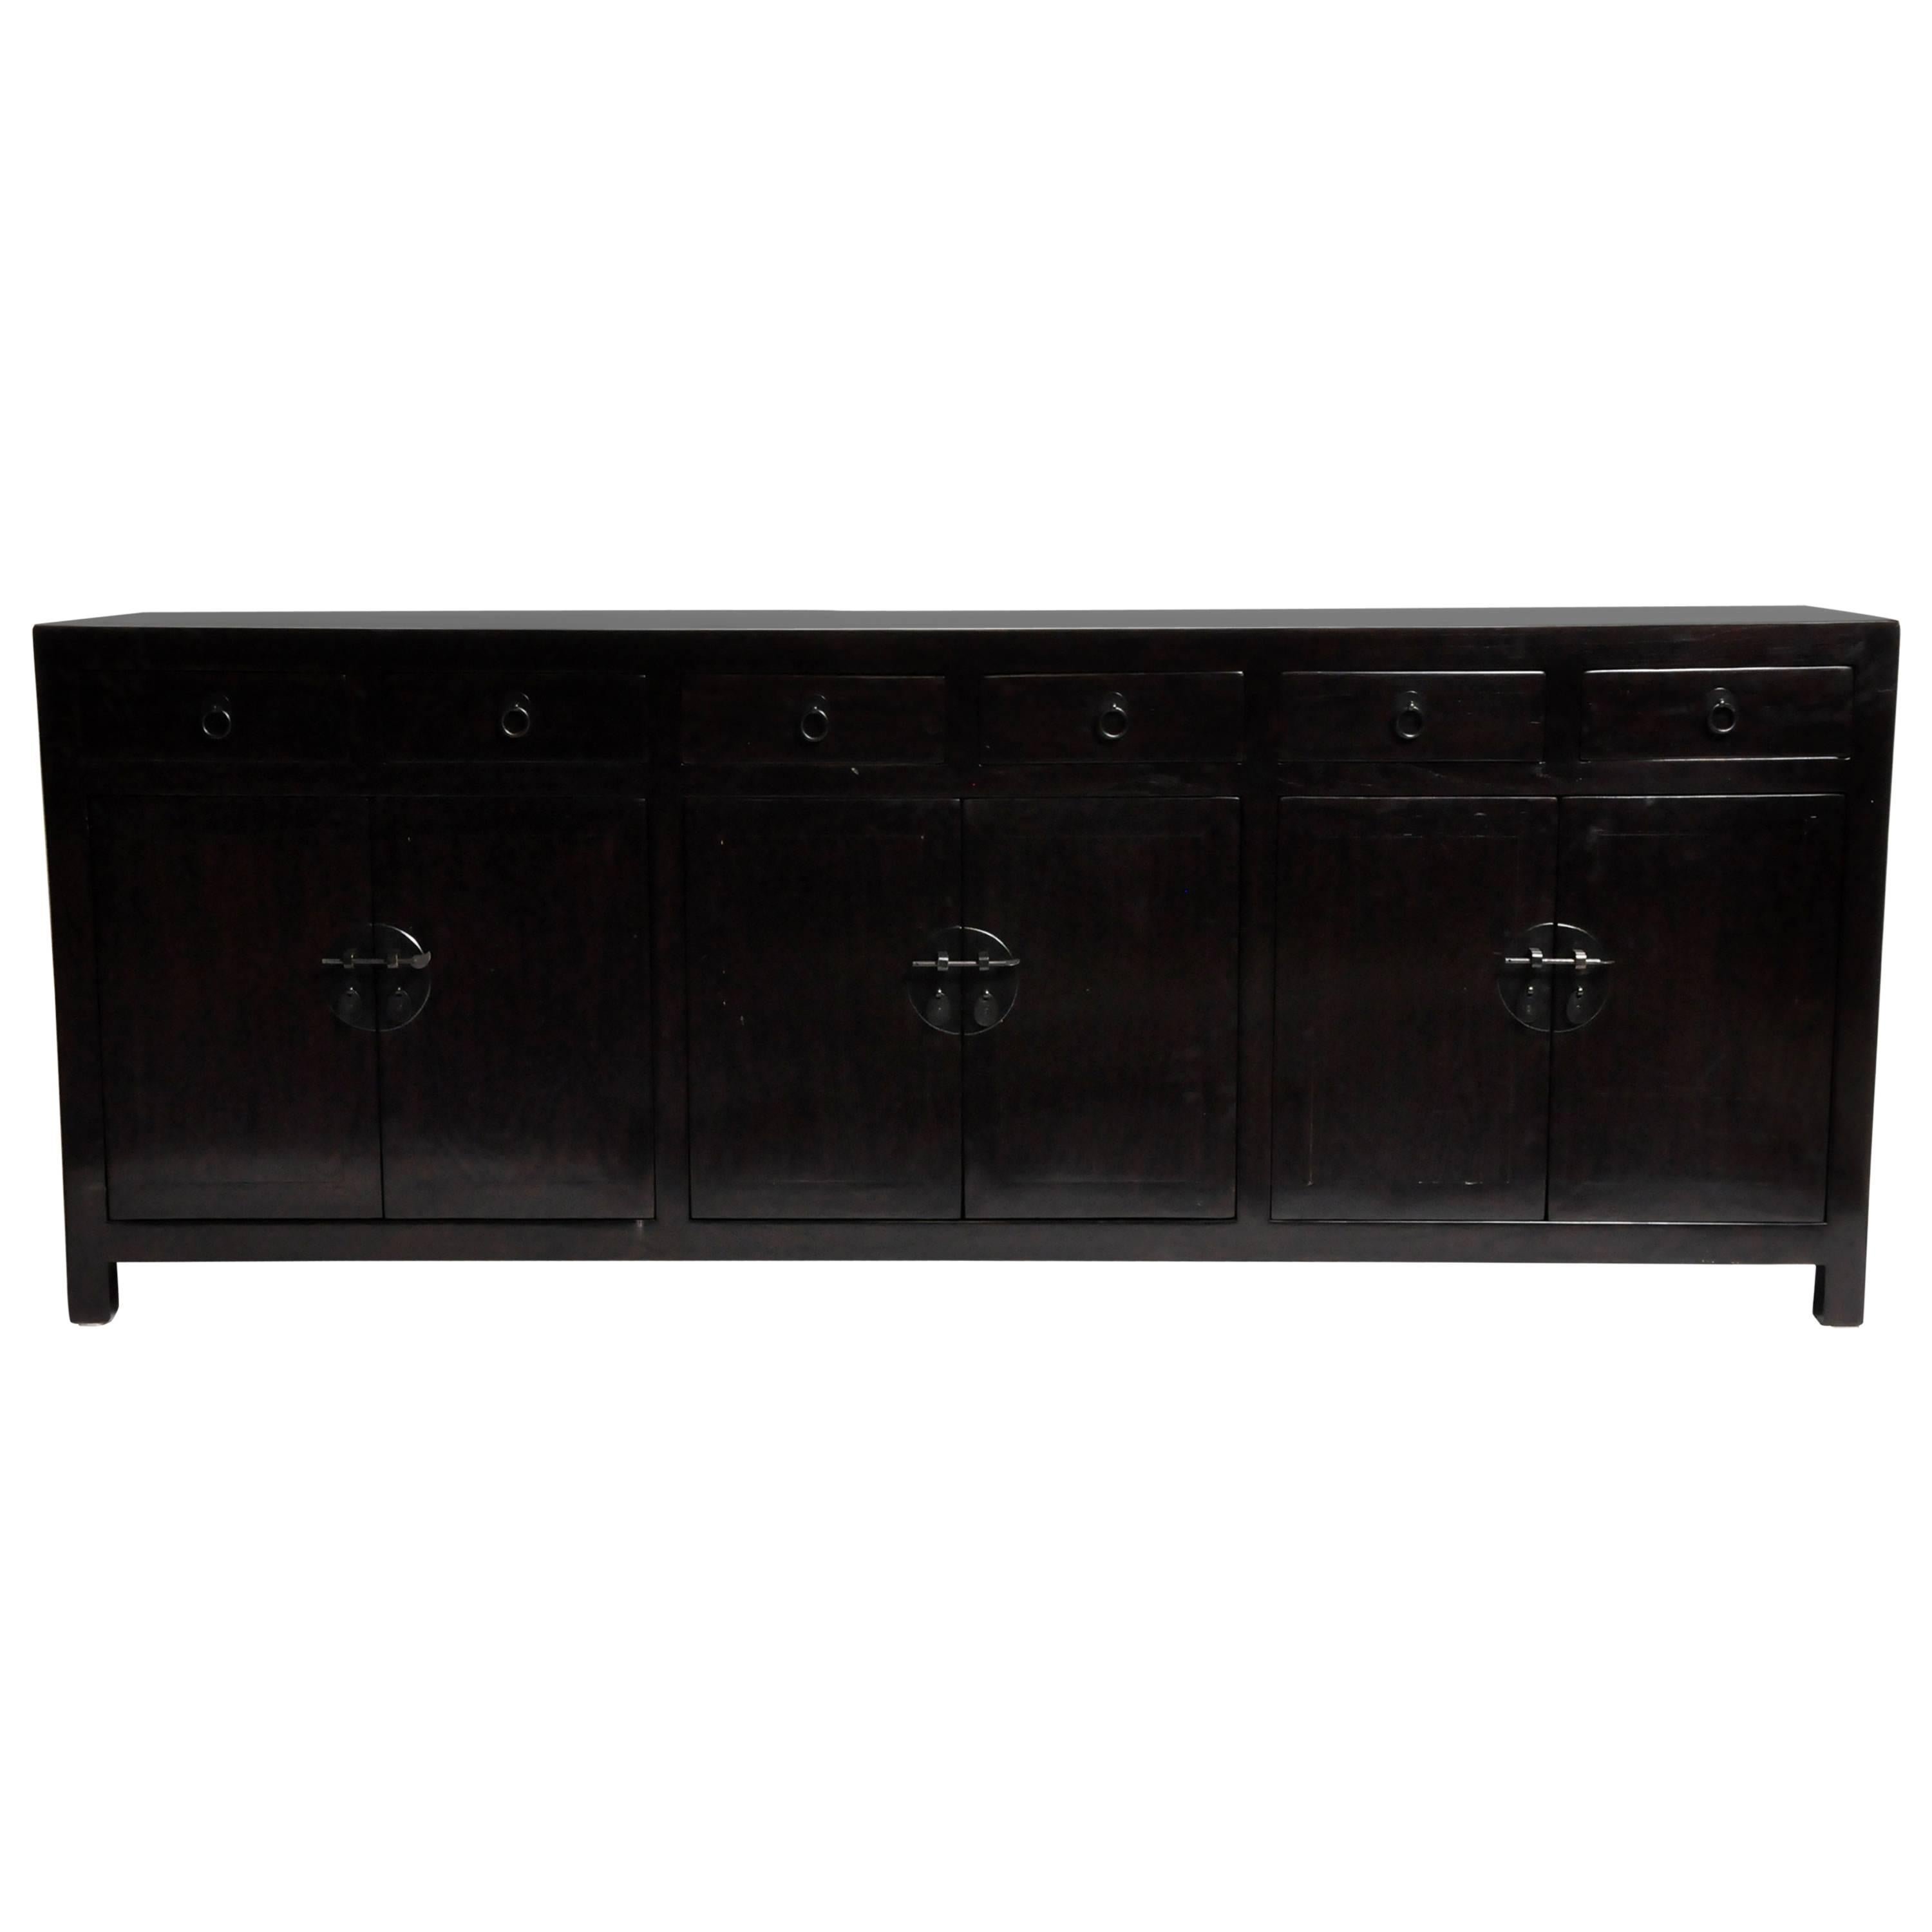 Chinese Sideboard with Six Drawers and Three Shelves